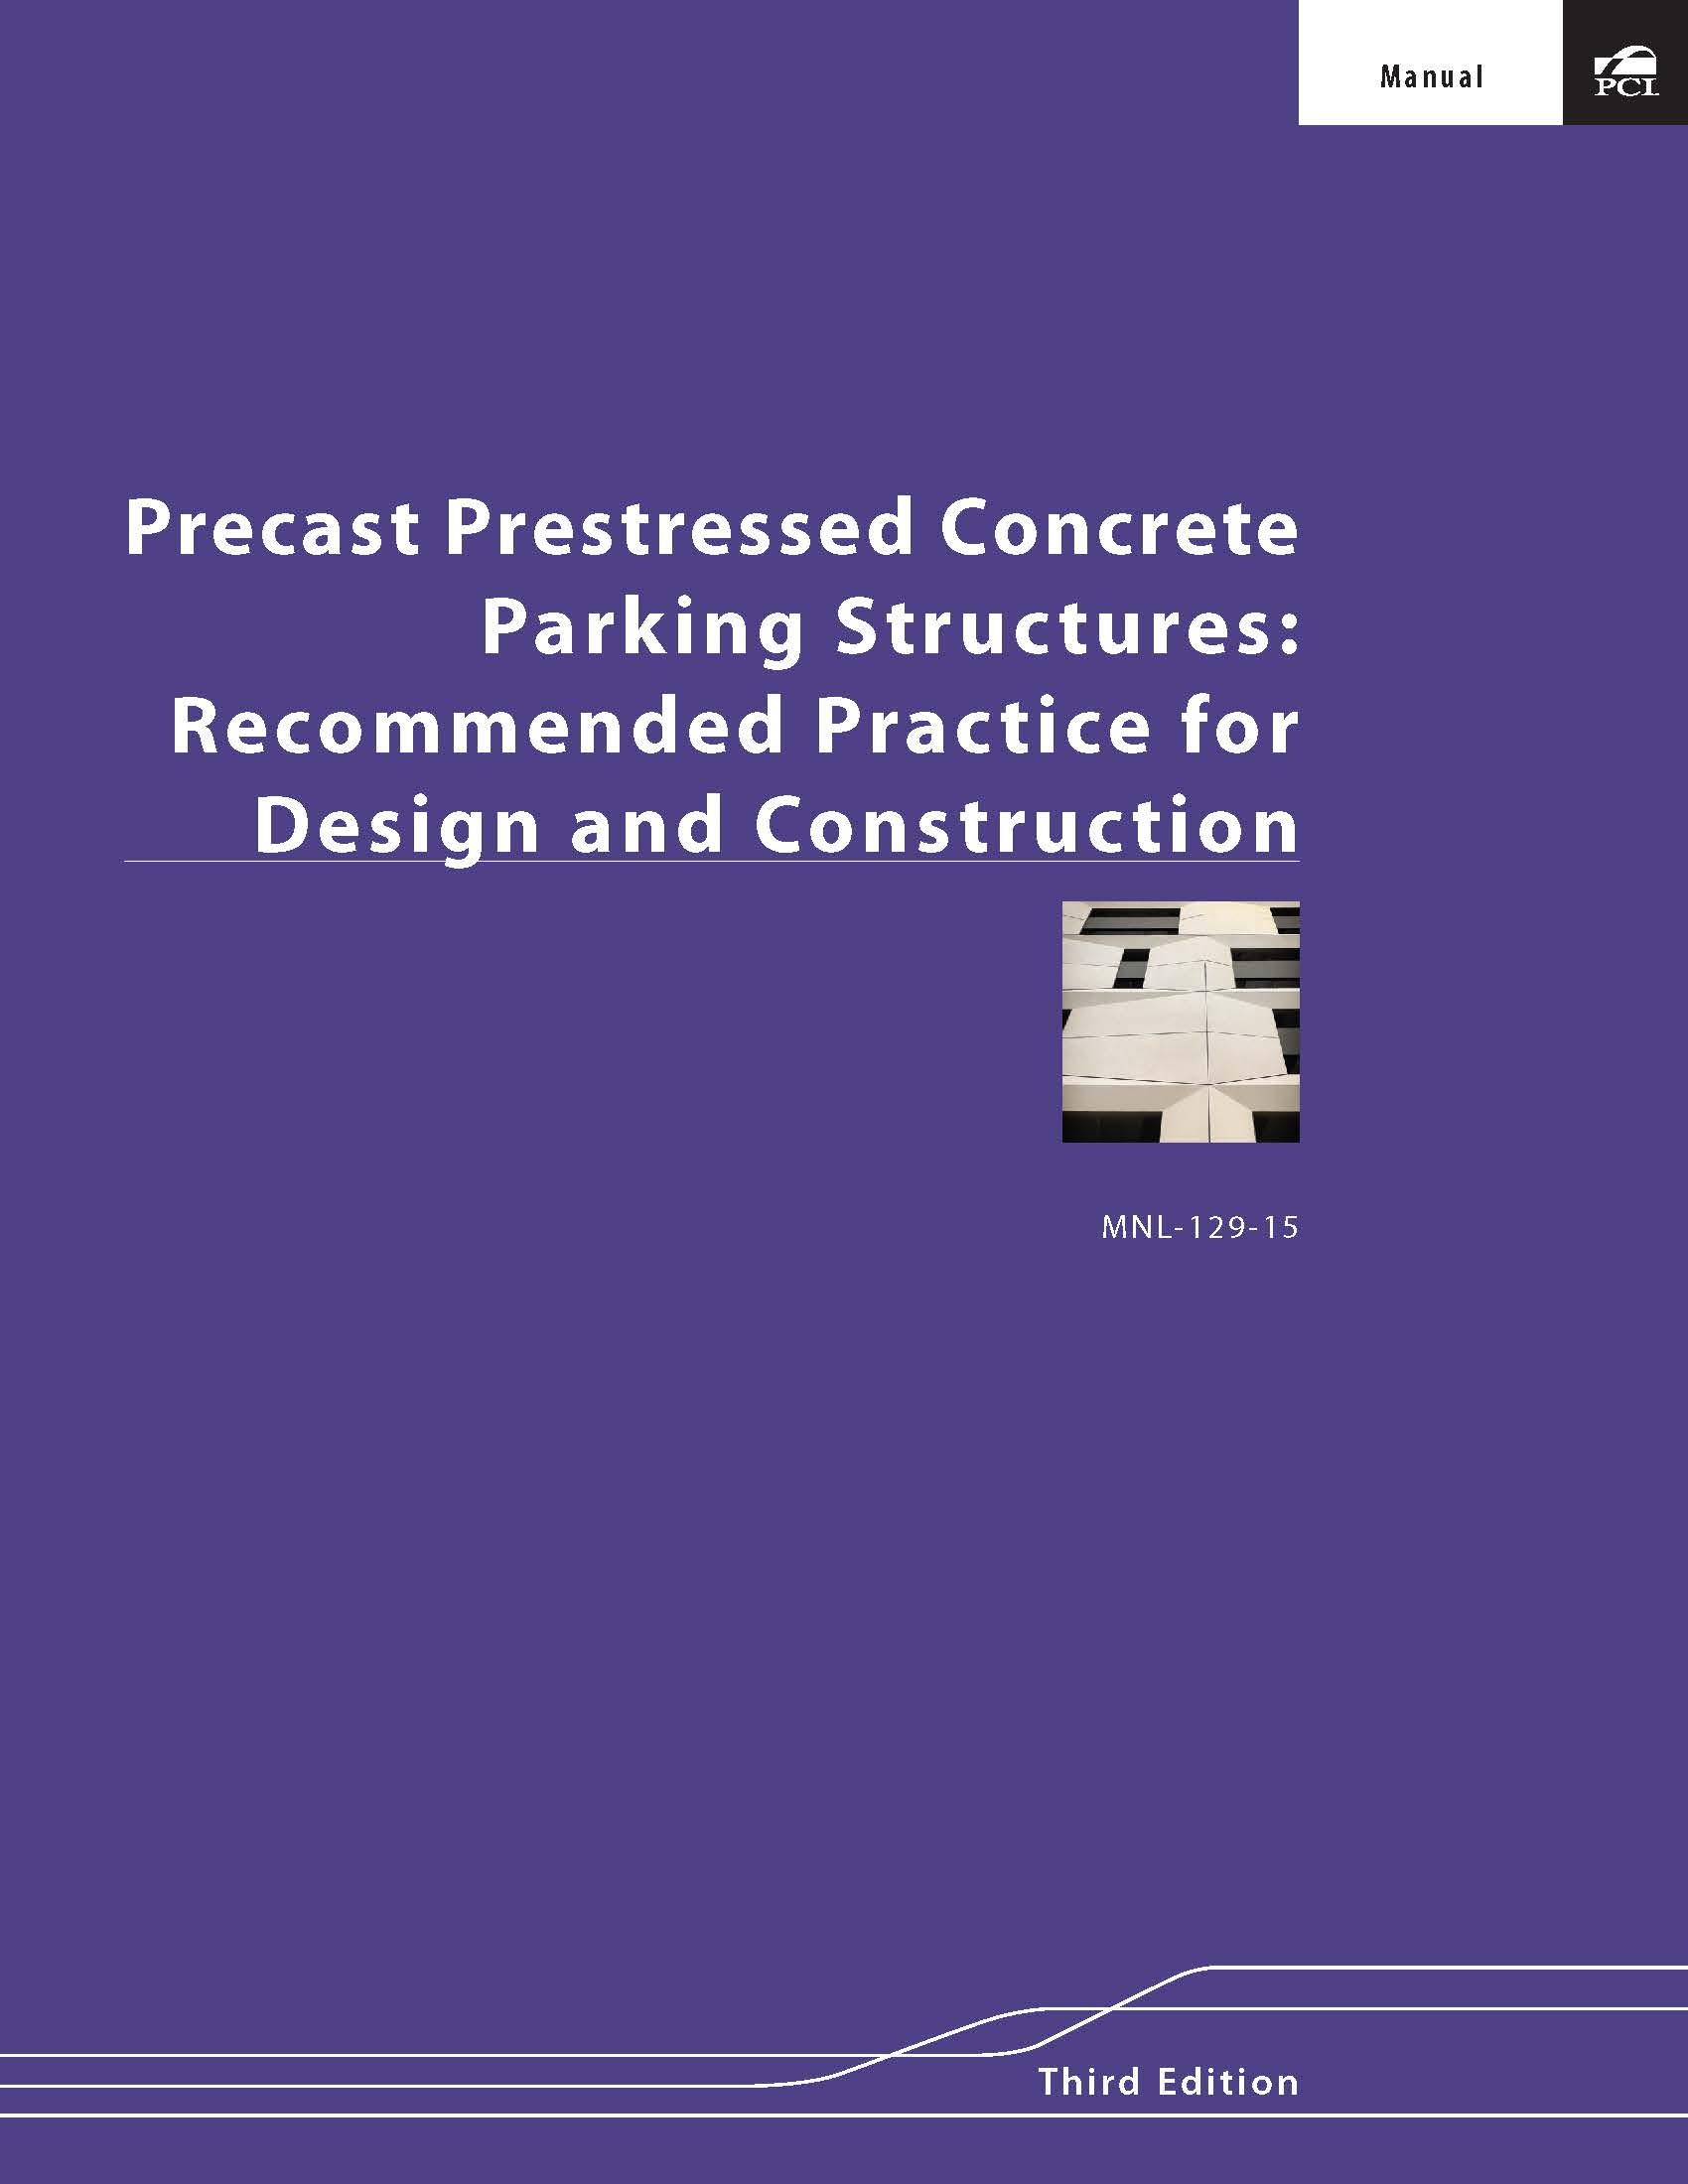 PCI manual for Precast Prestressed Concrete Parking Structures: Recommended Practice for Design and Construction